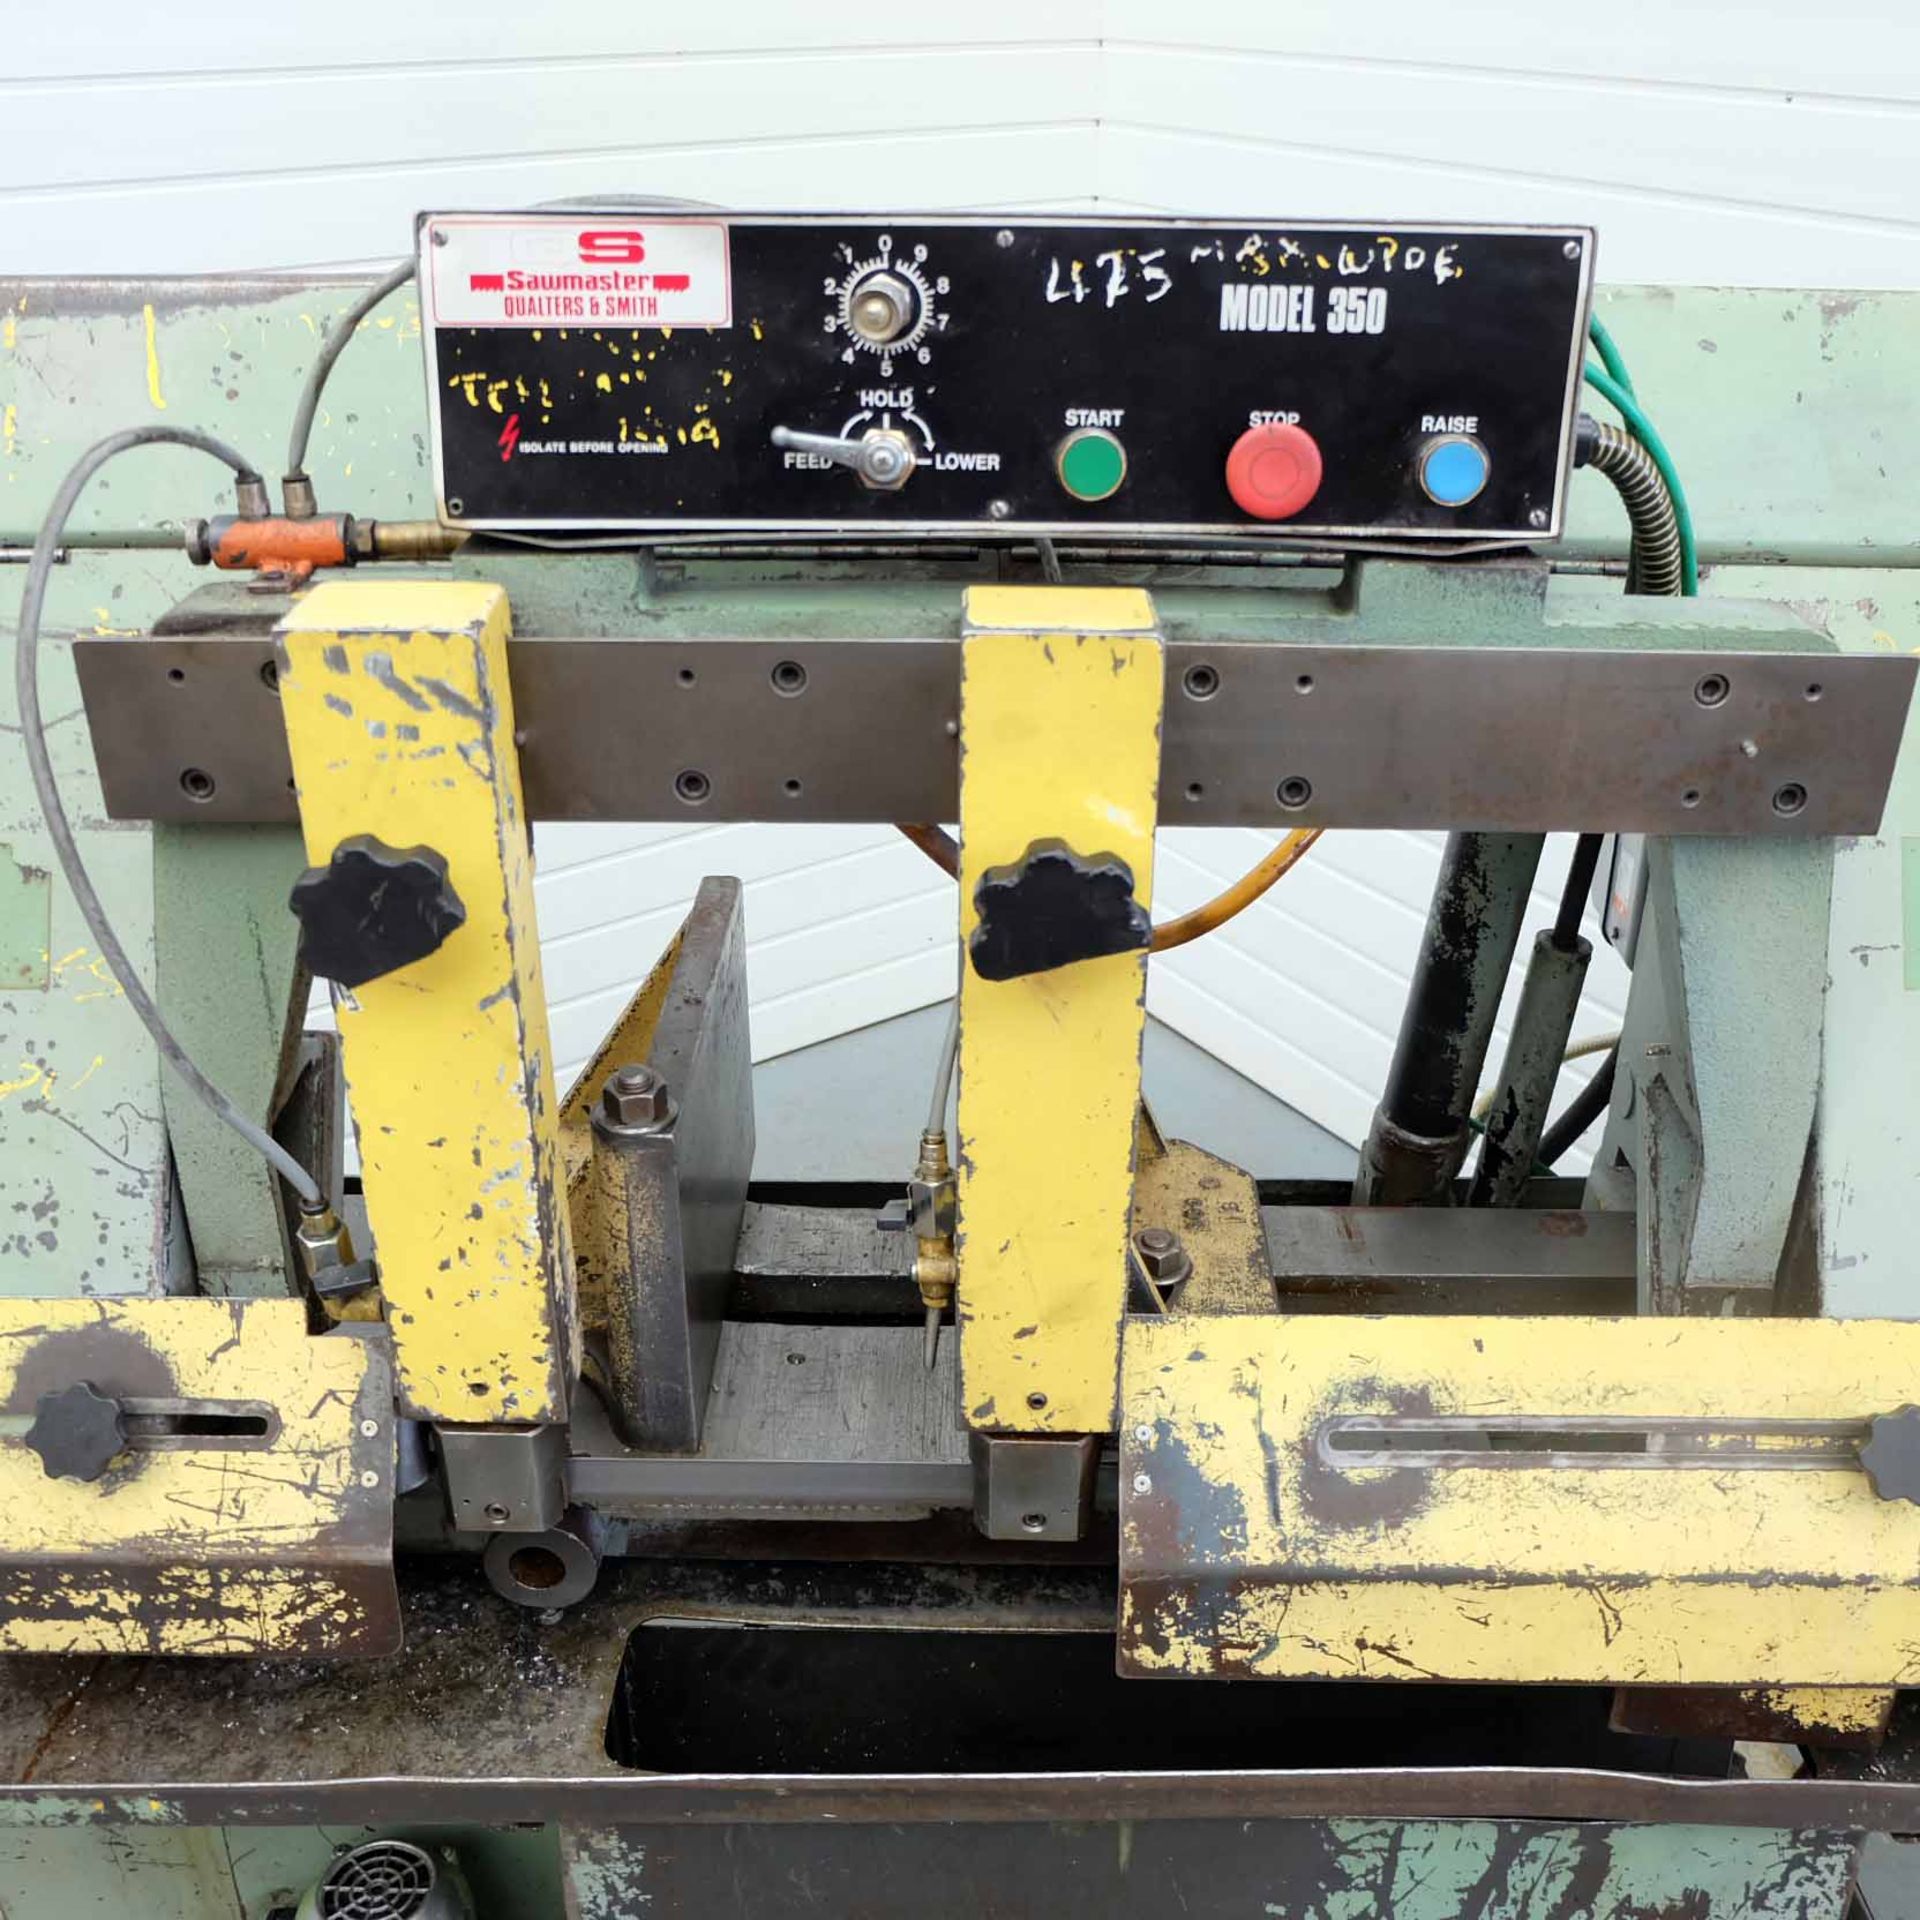 Qualters & Smith Model 350 Sawmaster Horizontal Bandsaw. Capacity 350mm Diameter. Max Vice Opening 5 - Image 3 of 10